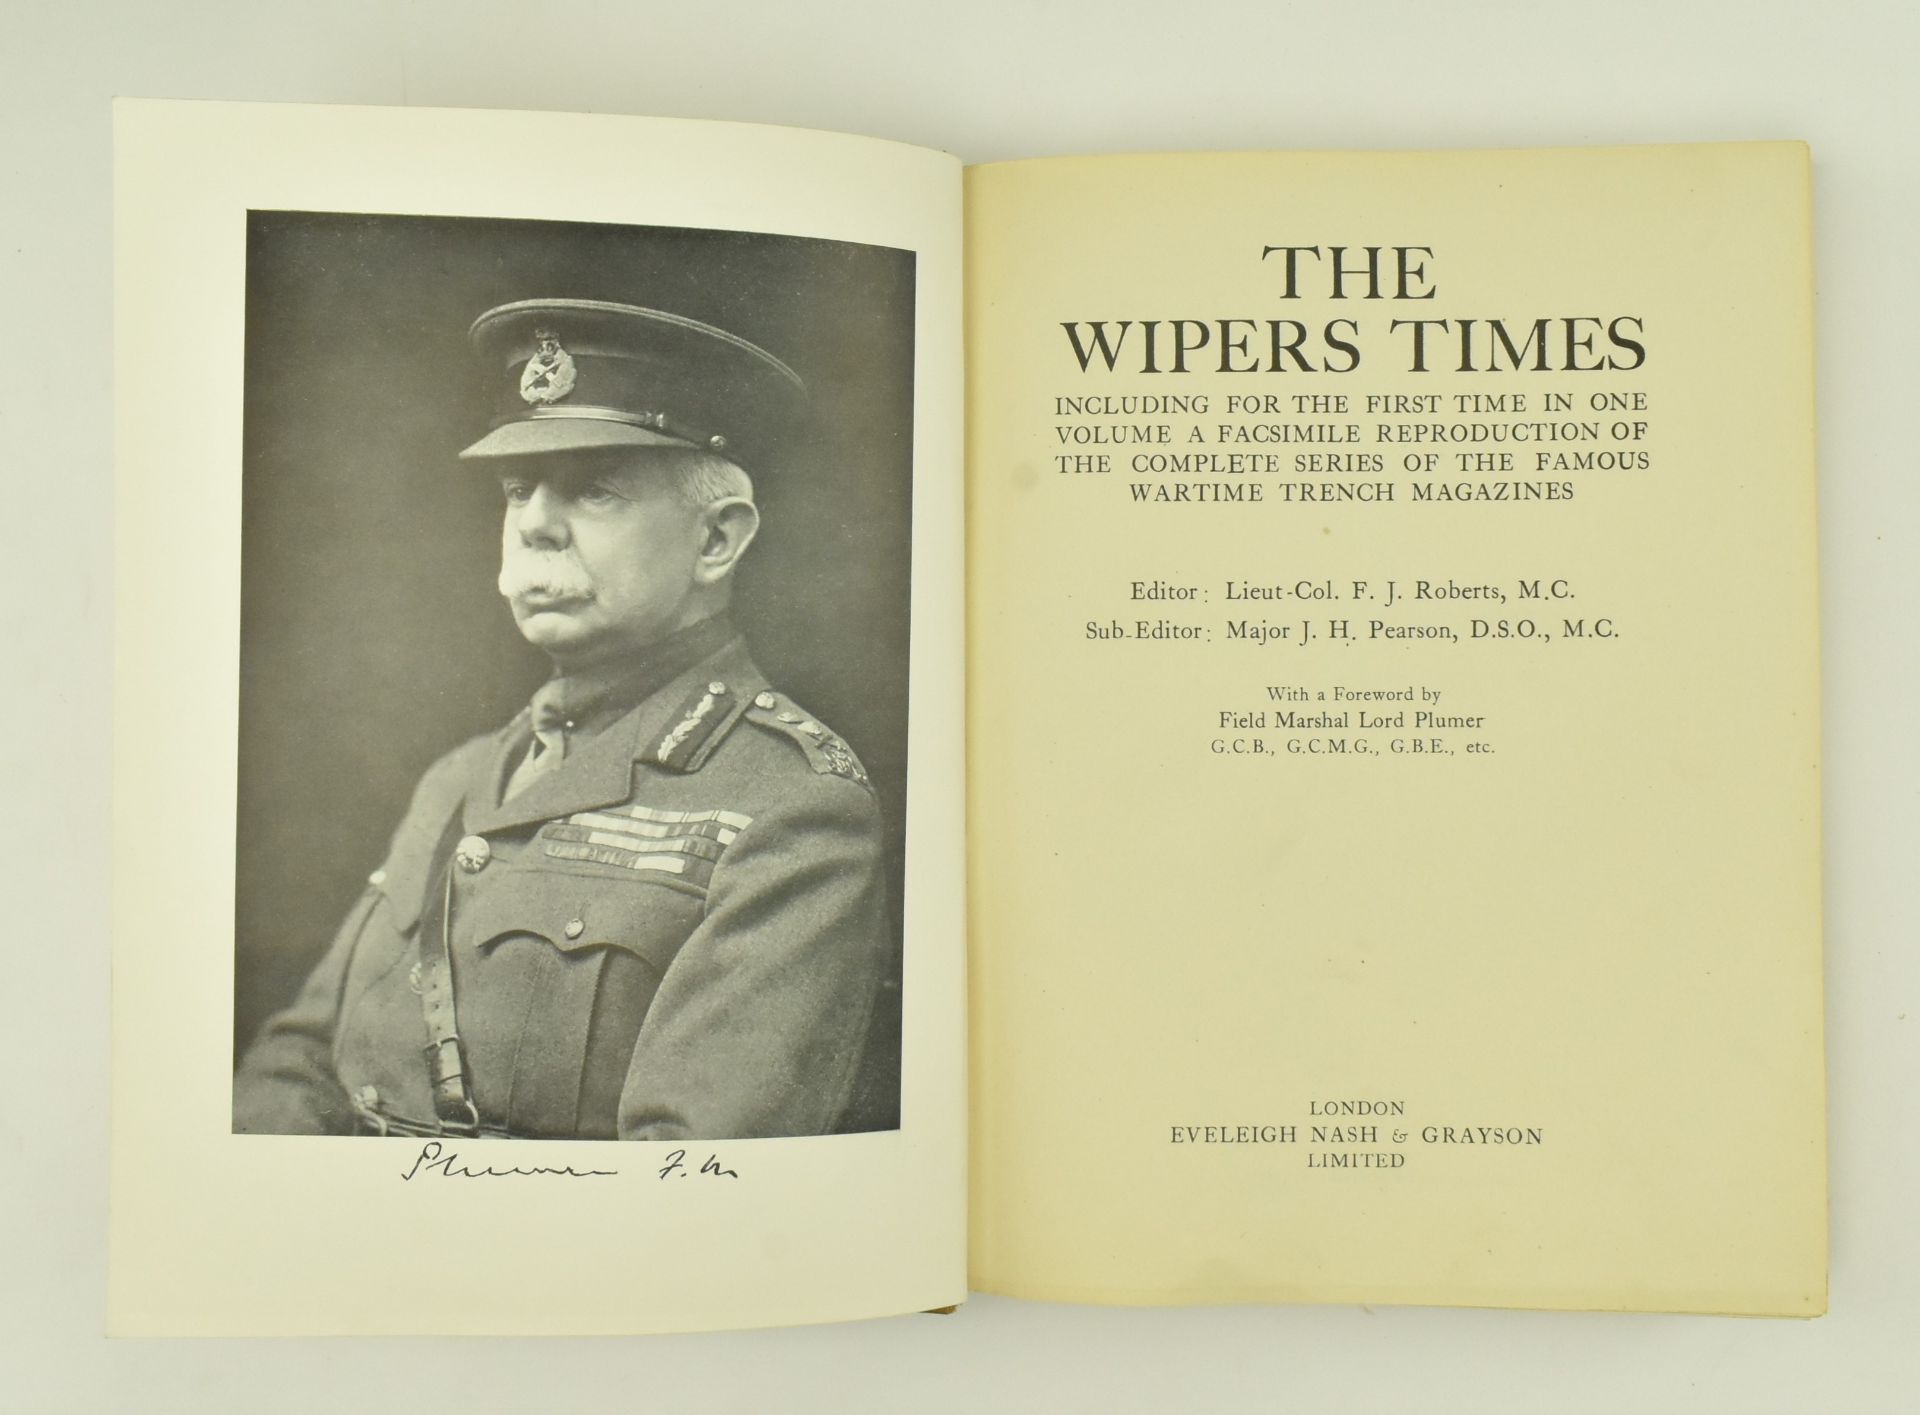 WW1 INTEREST. COLLECTION OF ILLUSTRATED BOOKS & MAGAZINES - Image 9 of 9